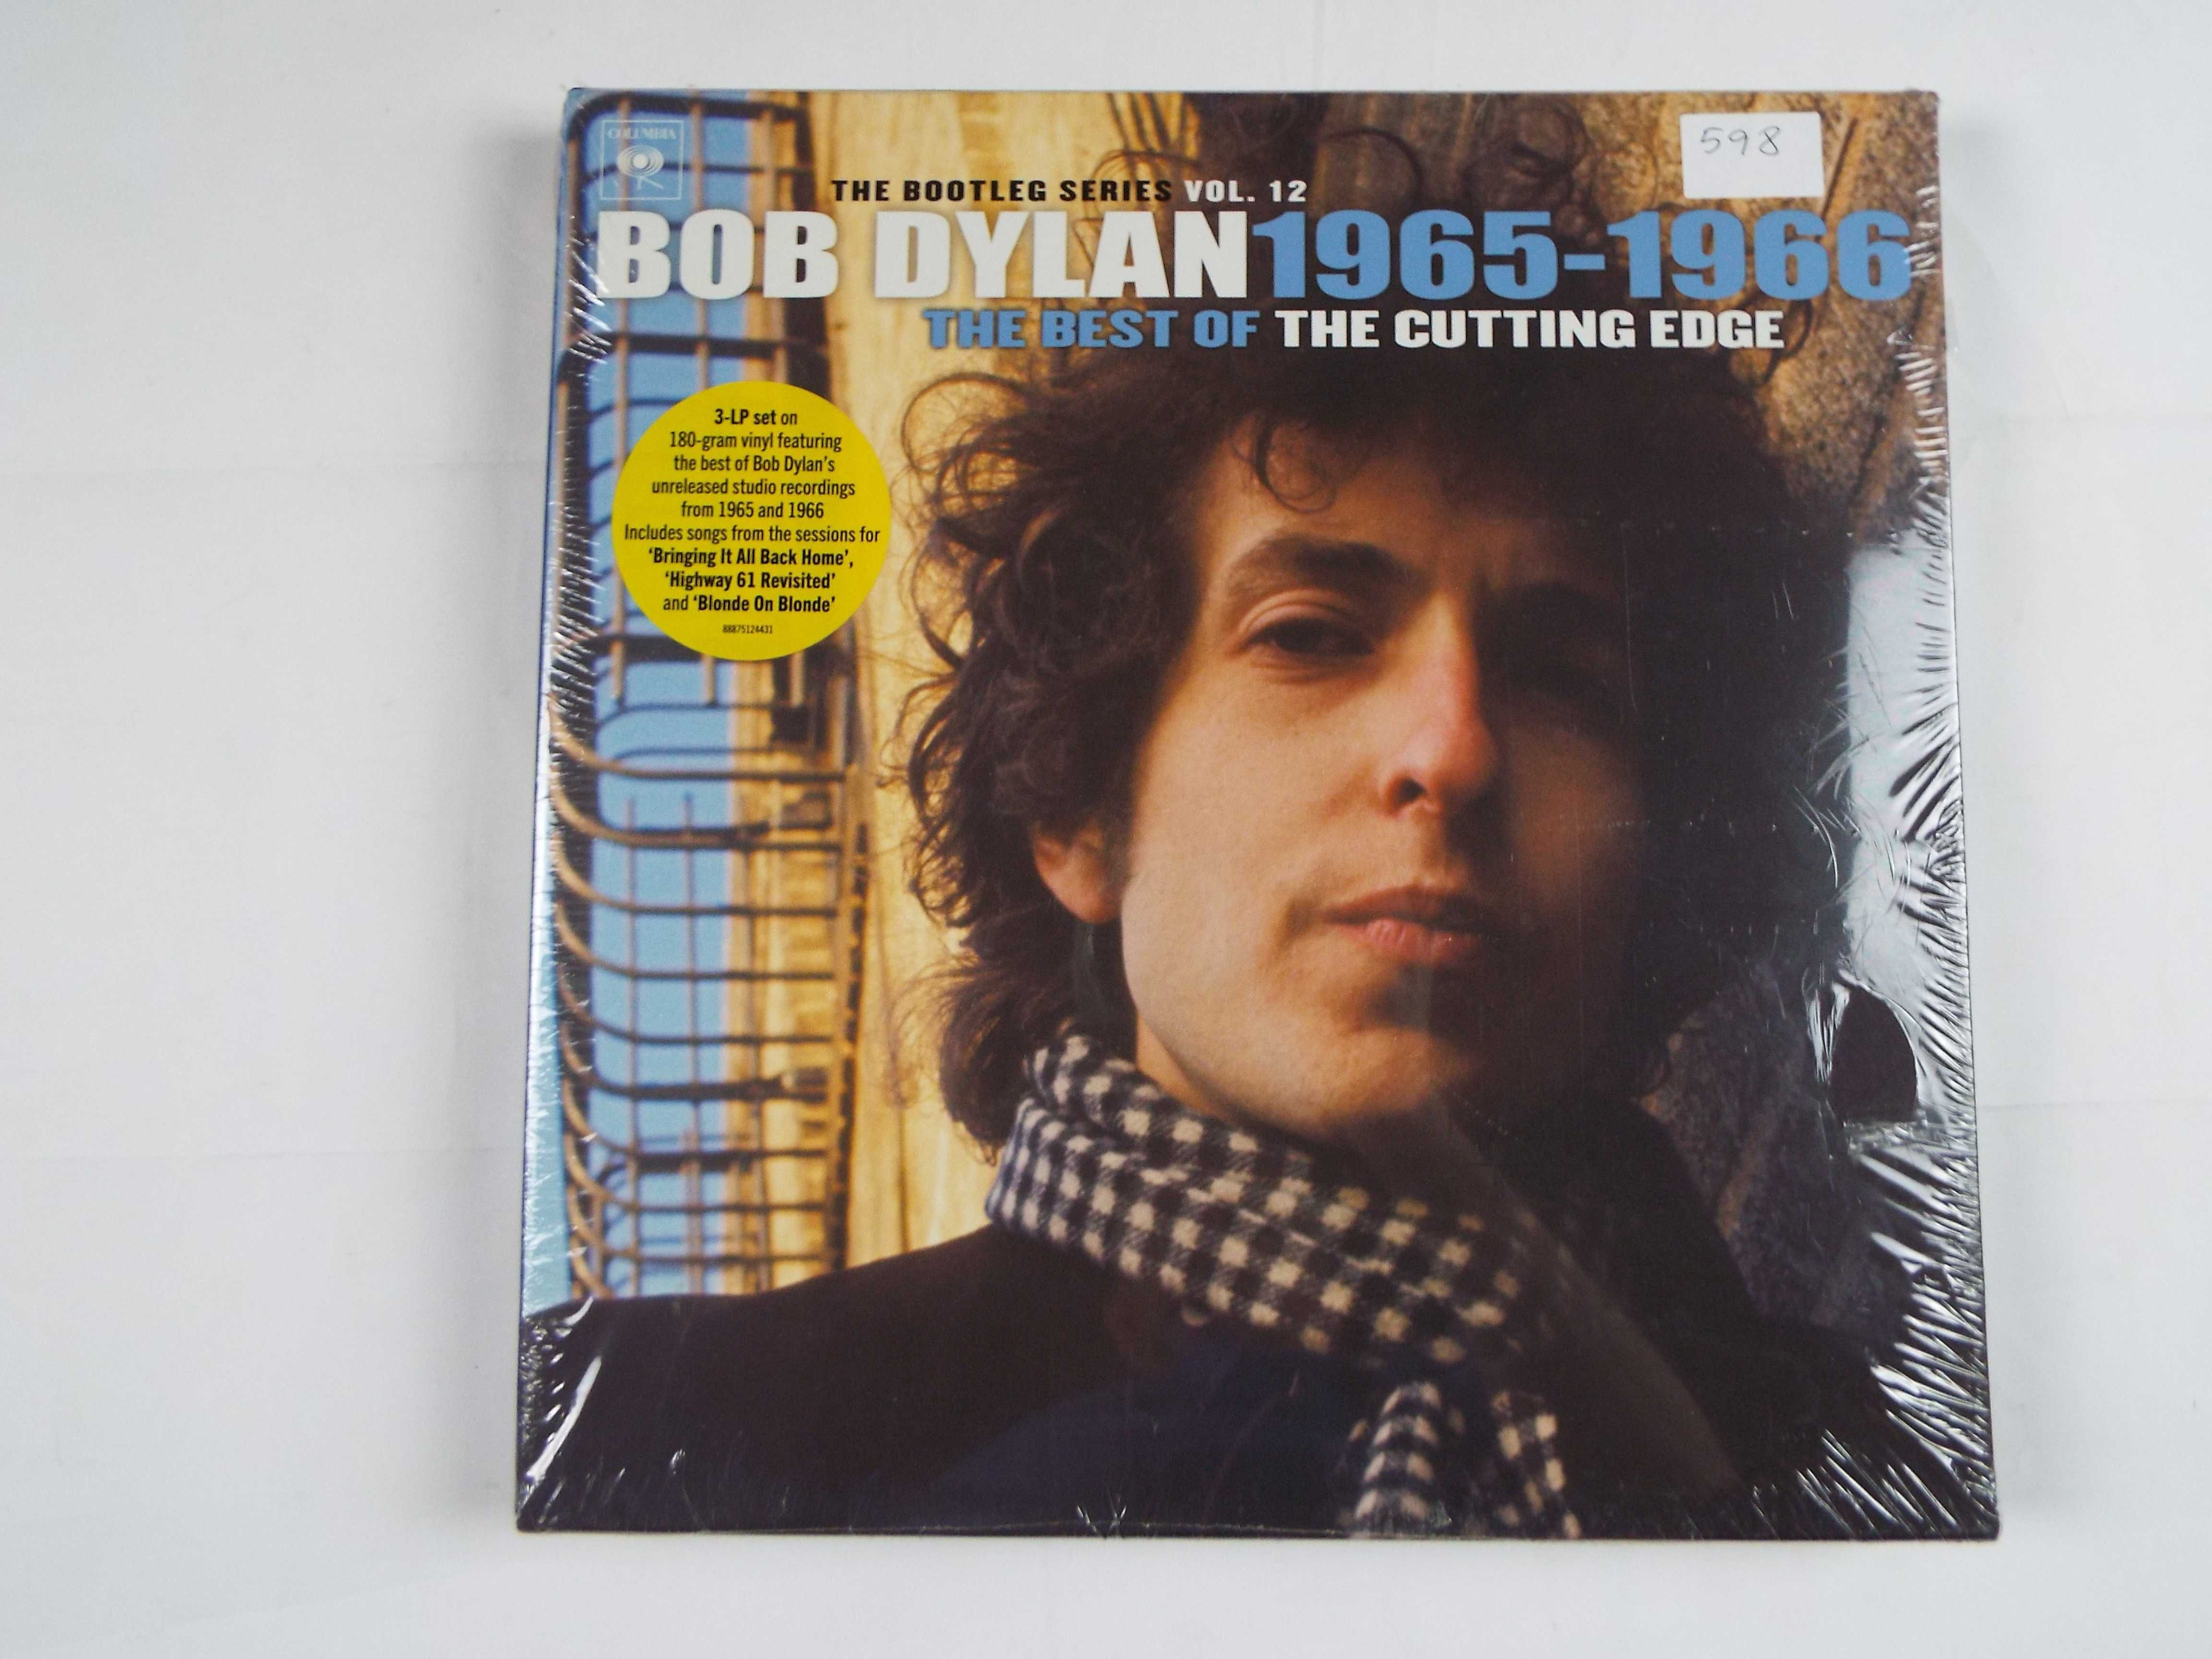 Box winylowy Bob Dylan The best of the cutting edge 1965/1966